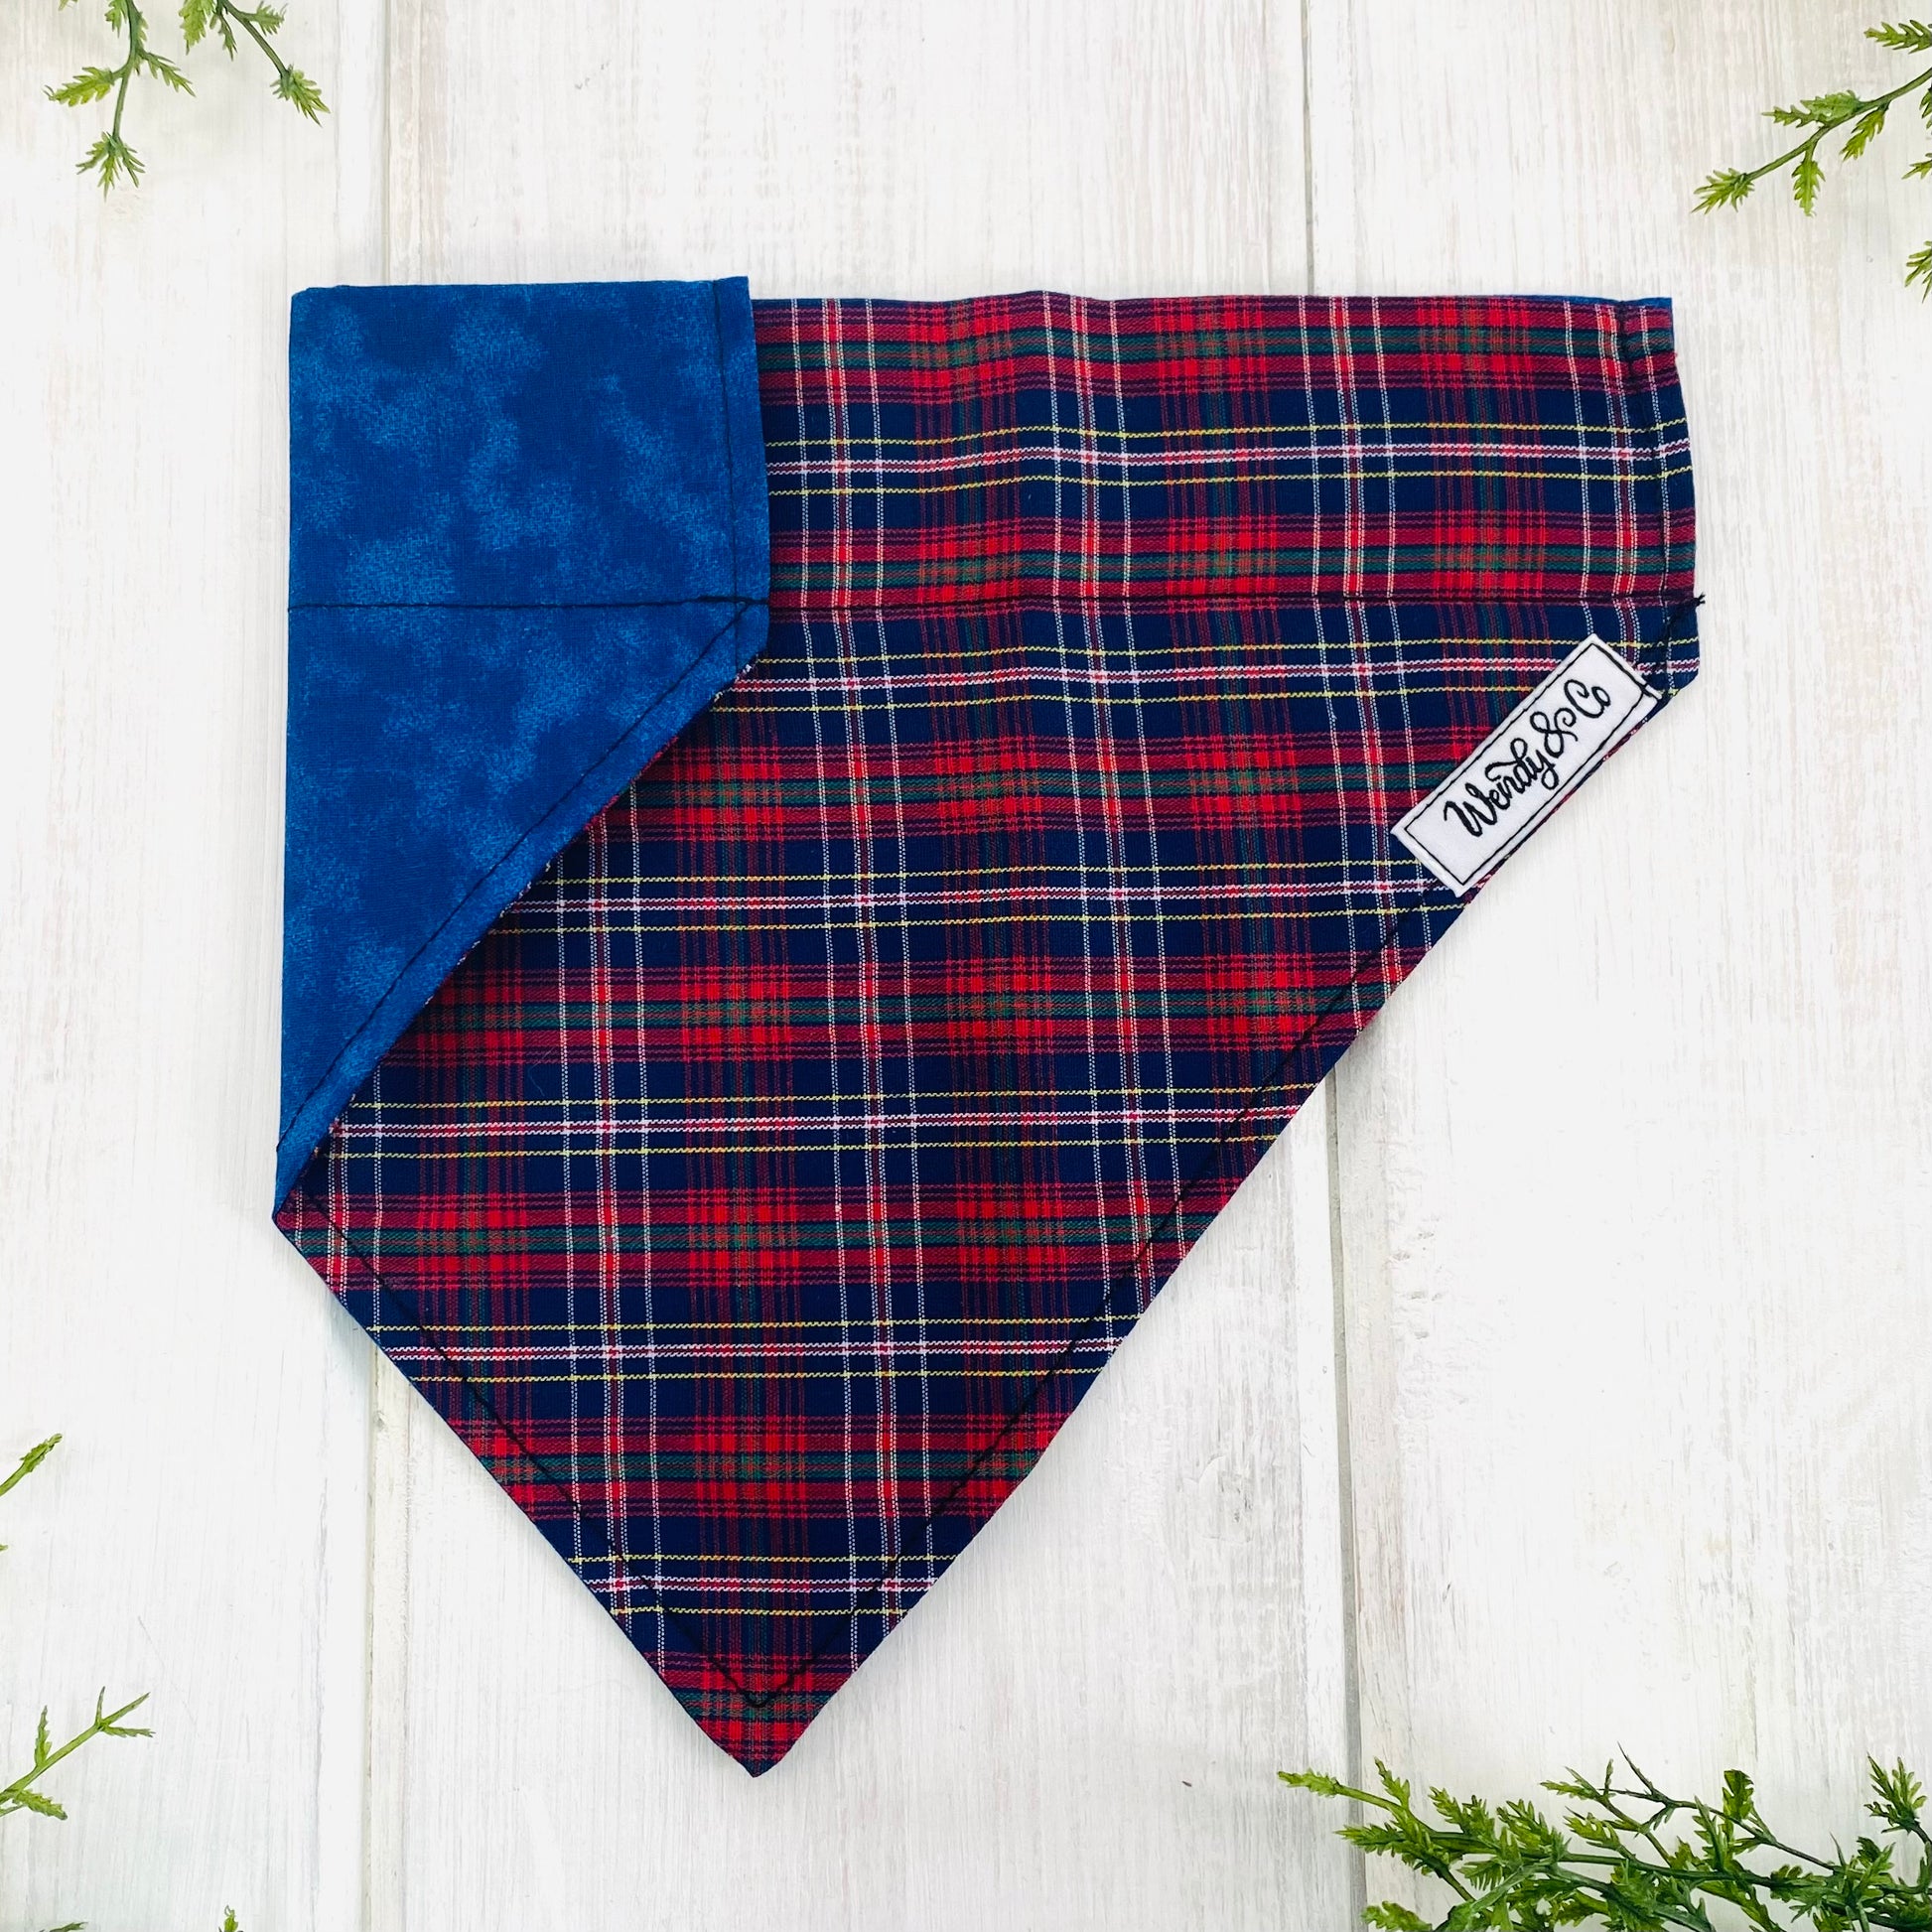 Tartan plaid navy and red dog bandana that slips over the collar.